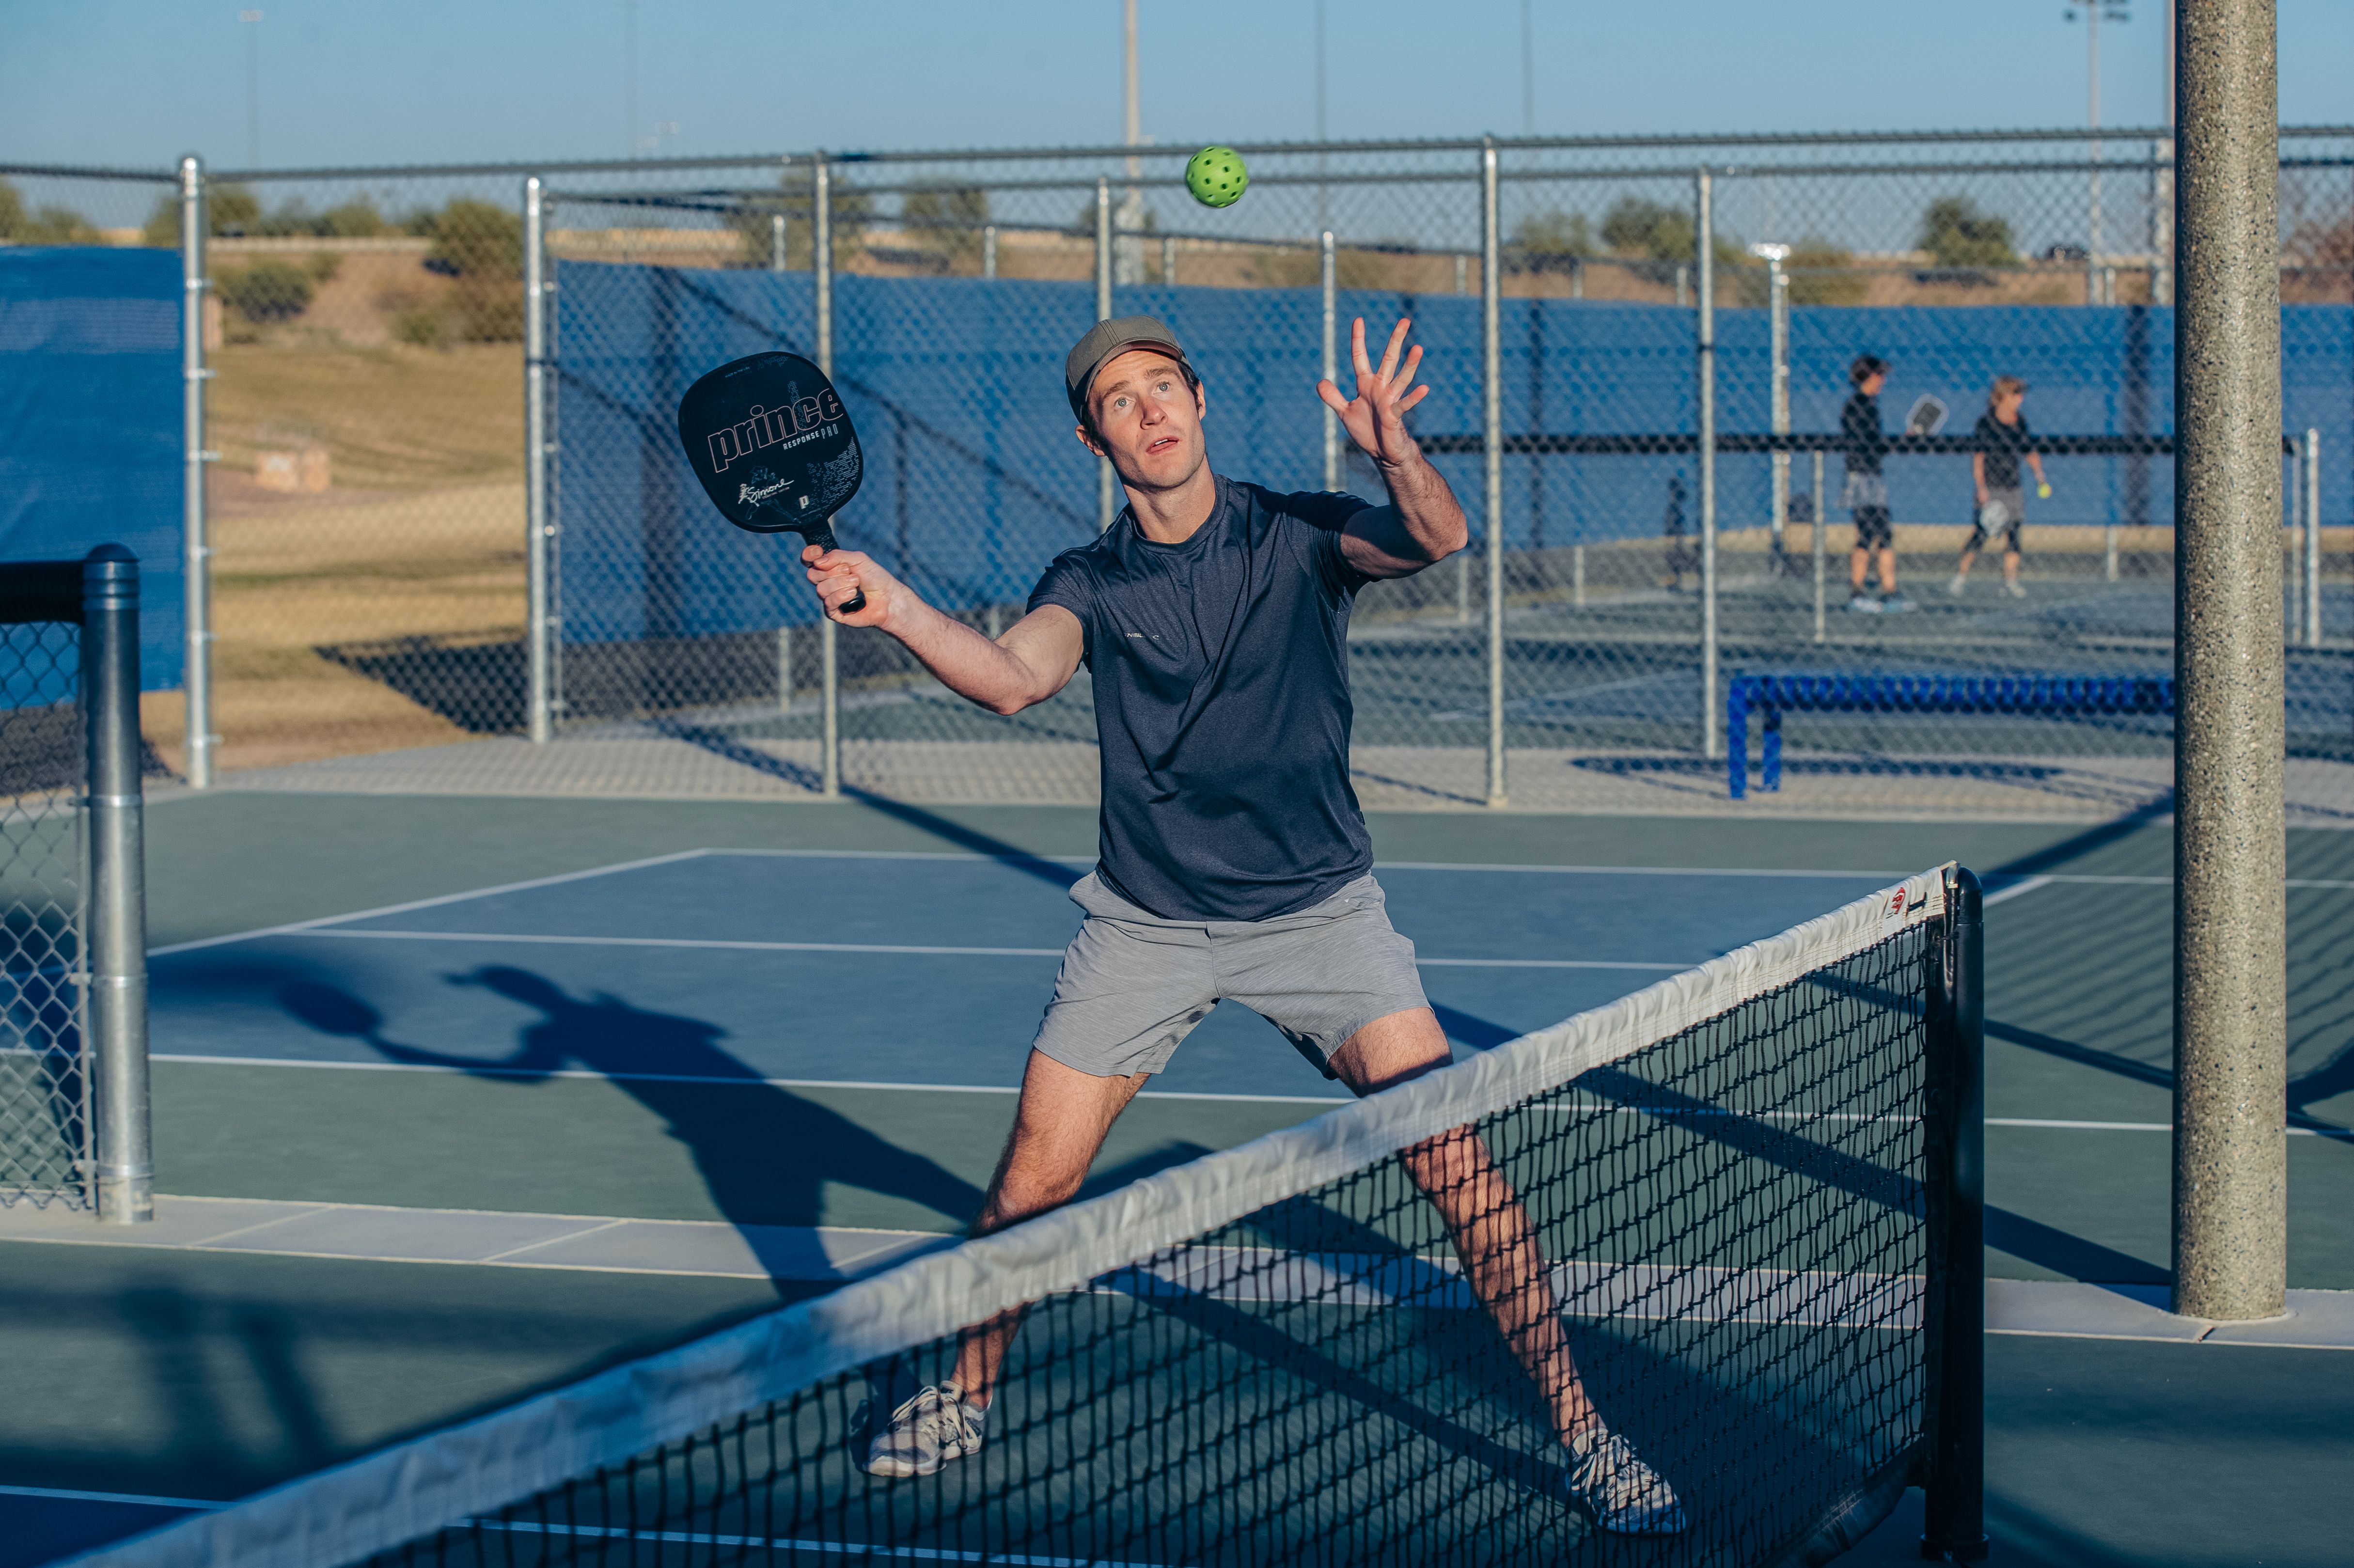 Pickleball player prepares to hit a volley during a game